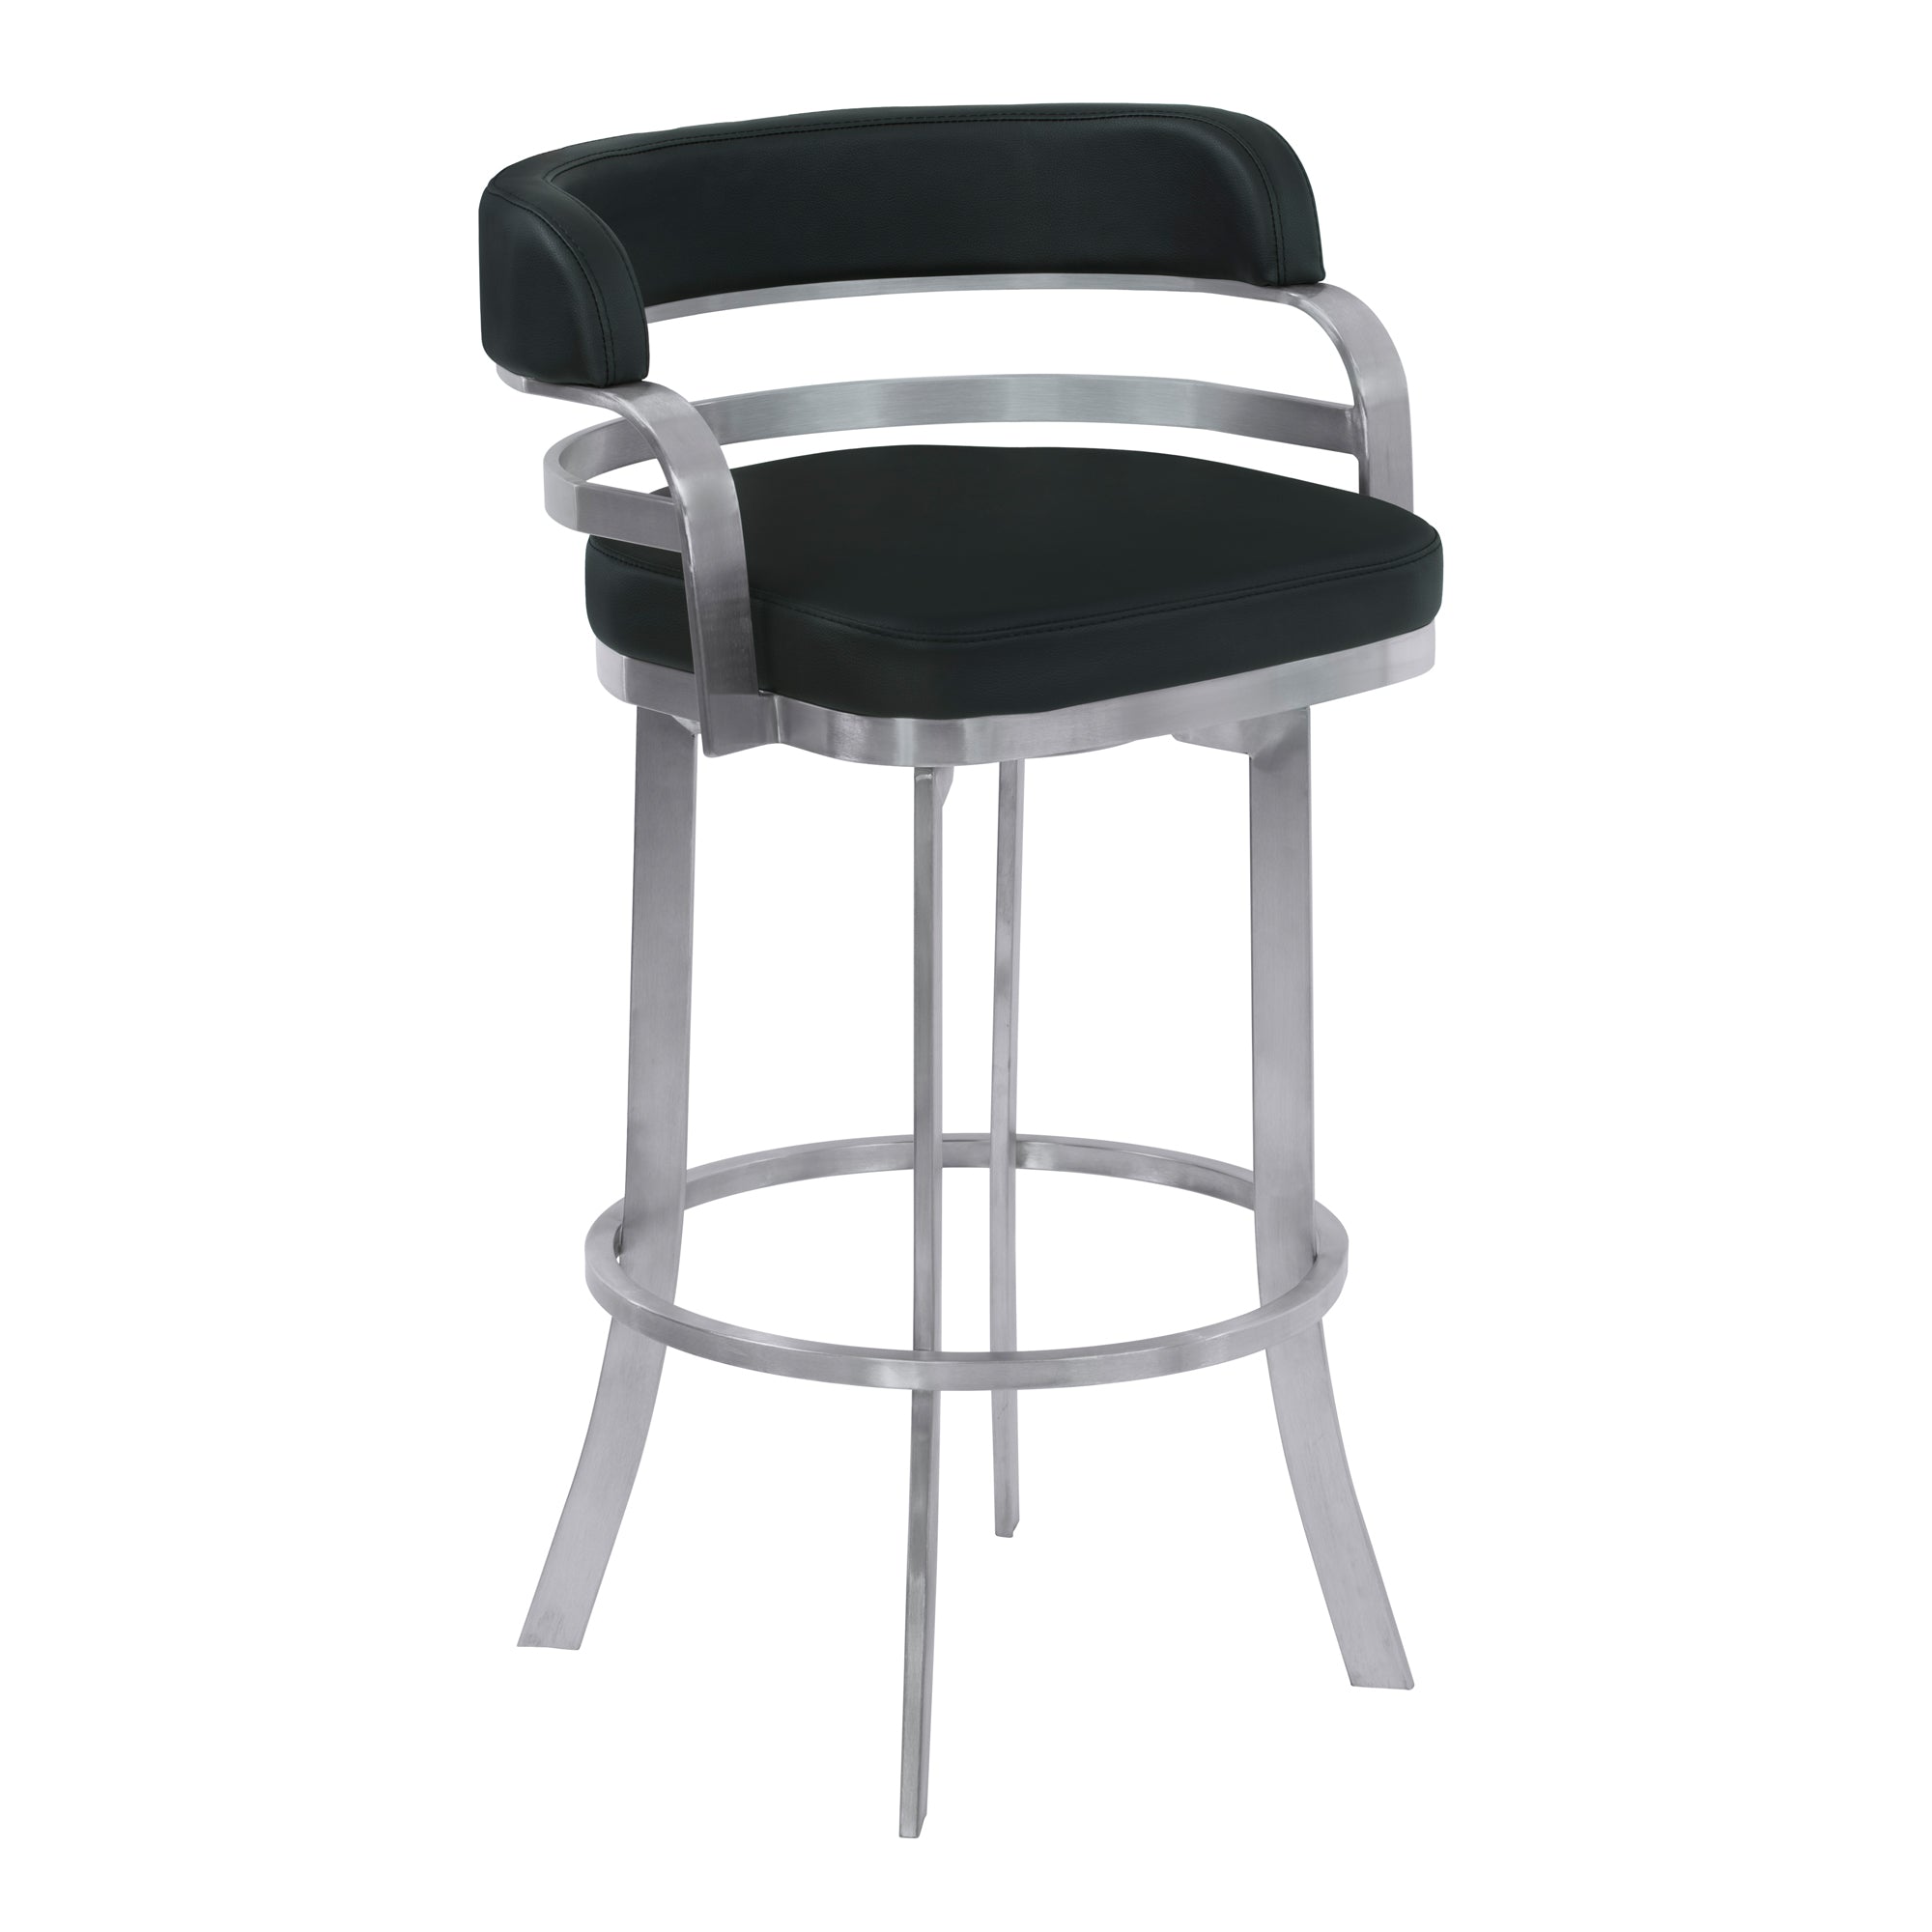 Armen Living Lcprbablbs30 Prinz 30" Bar Height Metal Swivel Barstool In Black Faux Leather With Brushed Stainless Steel Finish